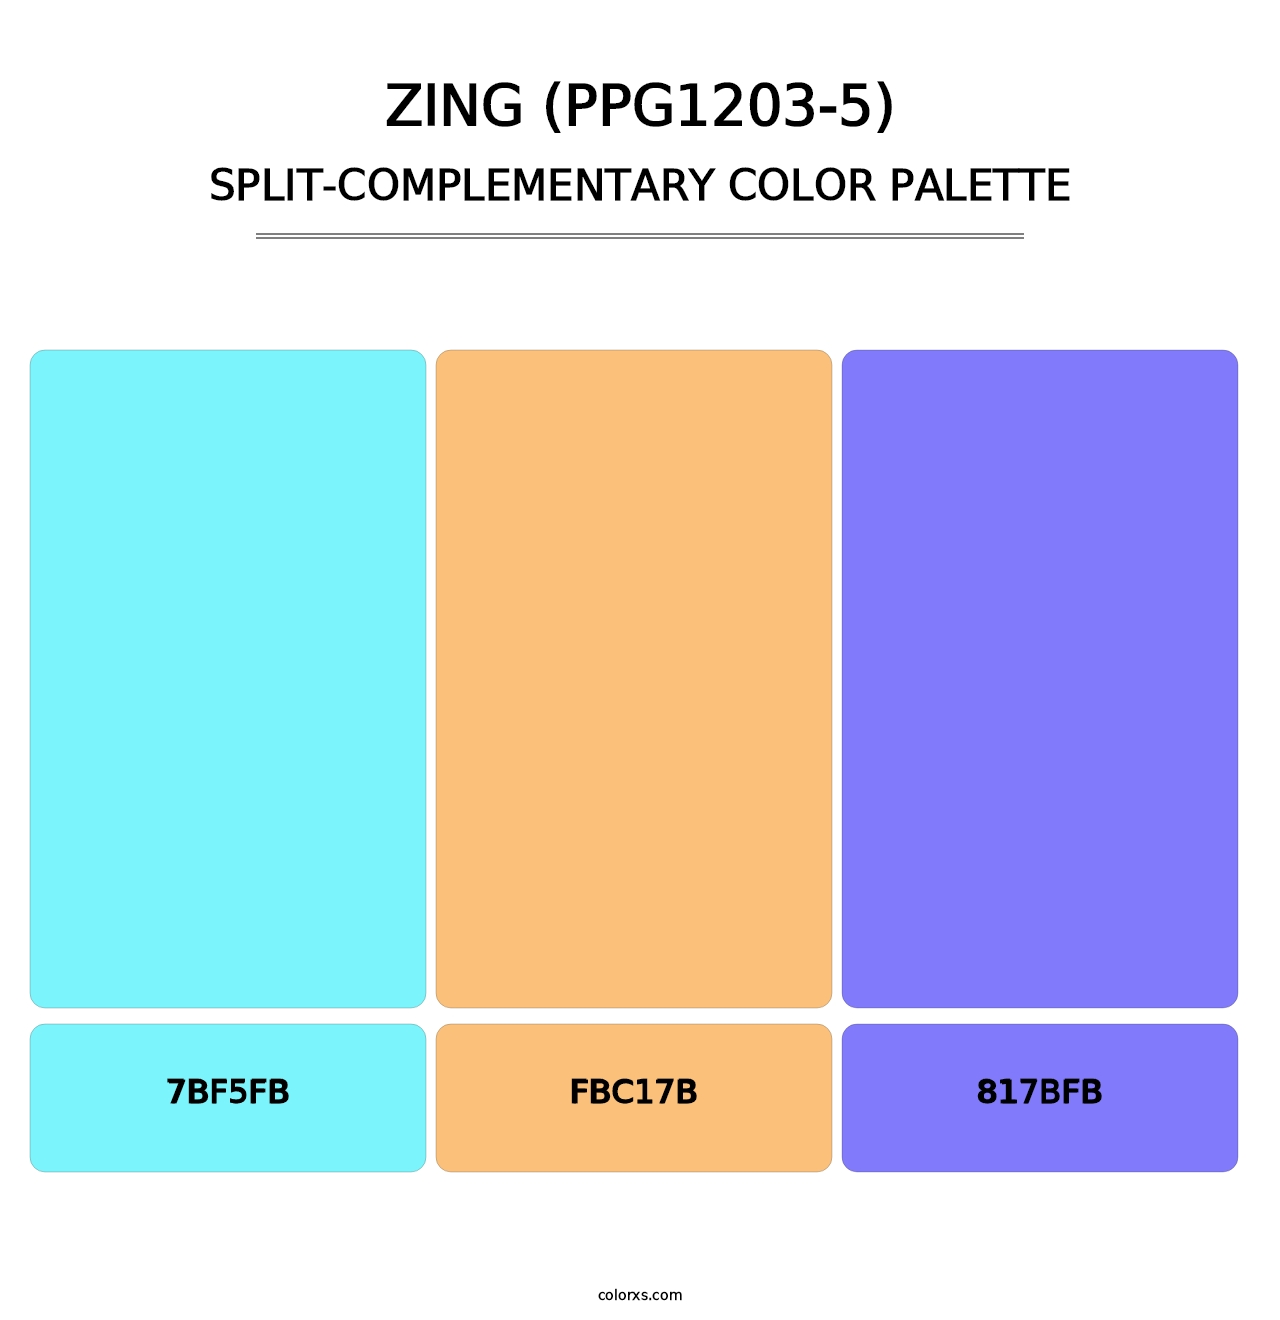 Zing (PPG1203-5) - Split-Complementary Color Palette